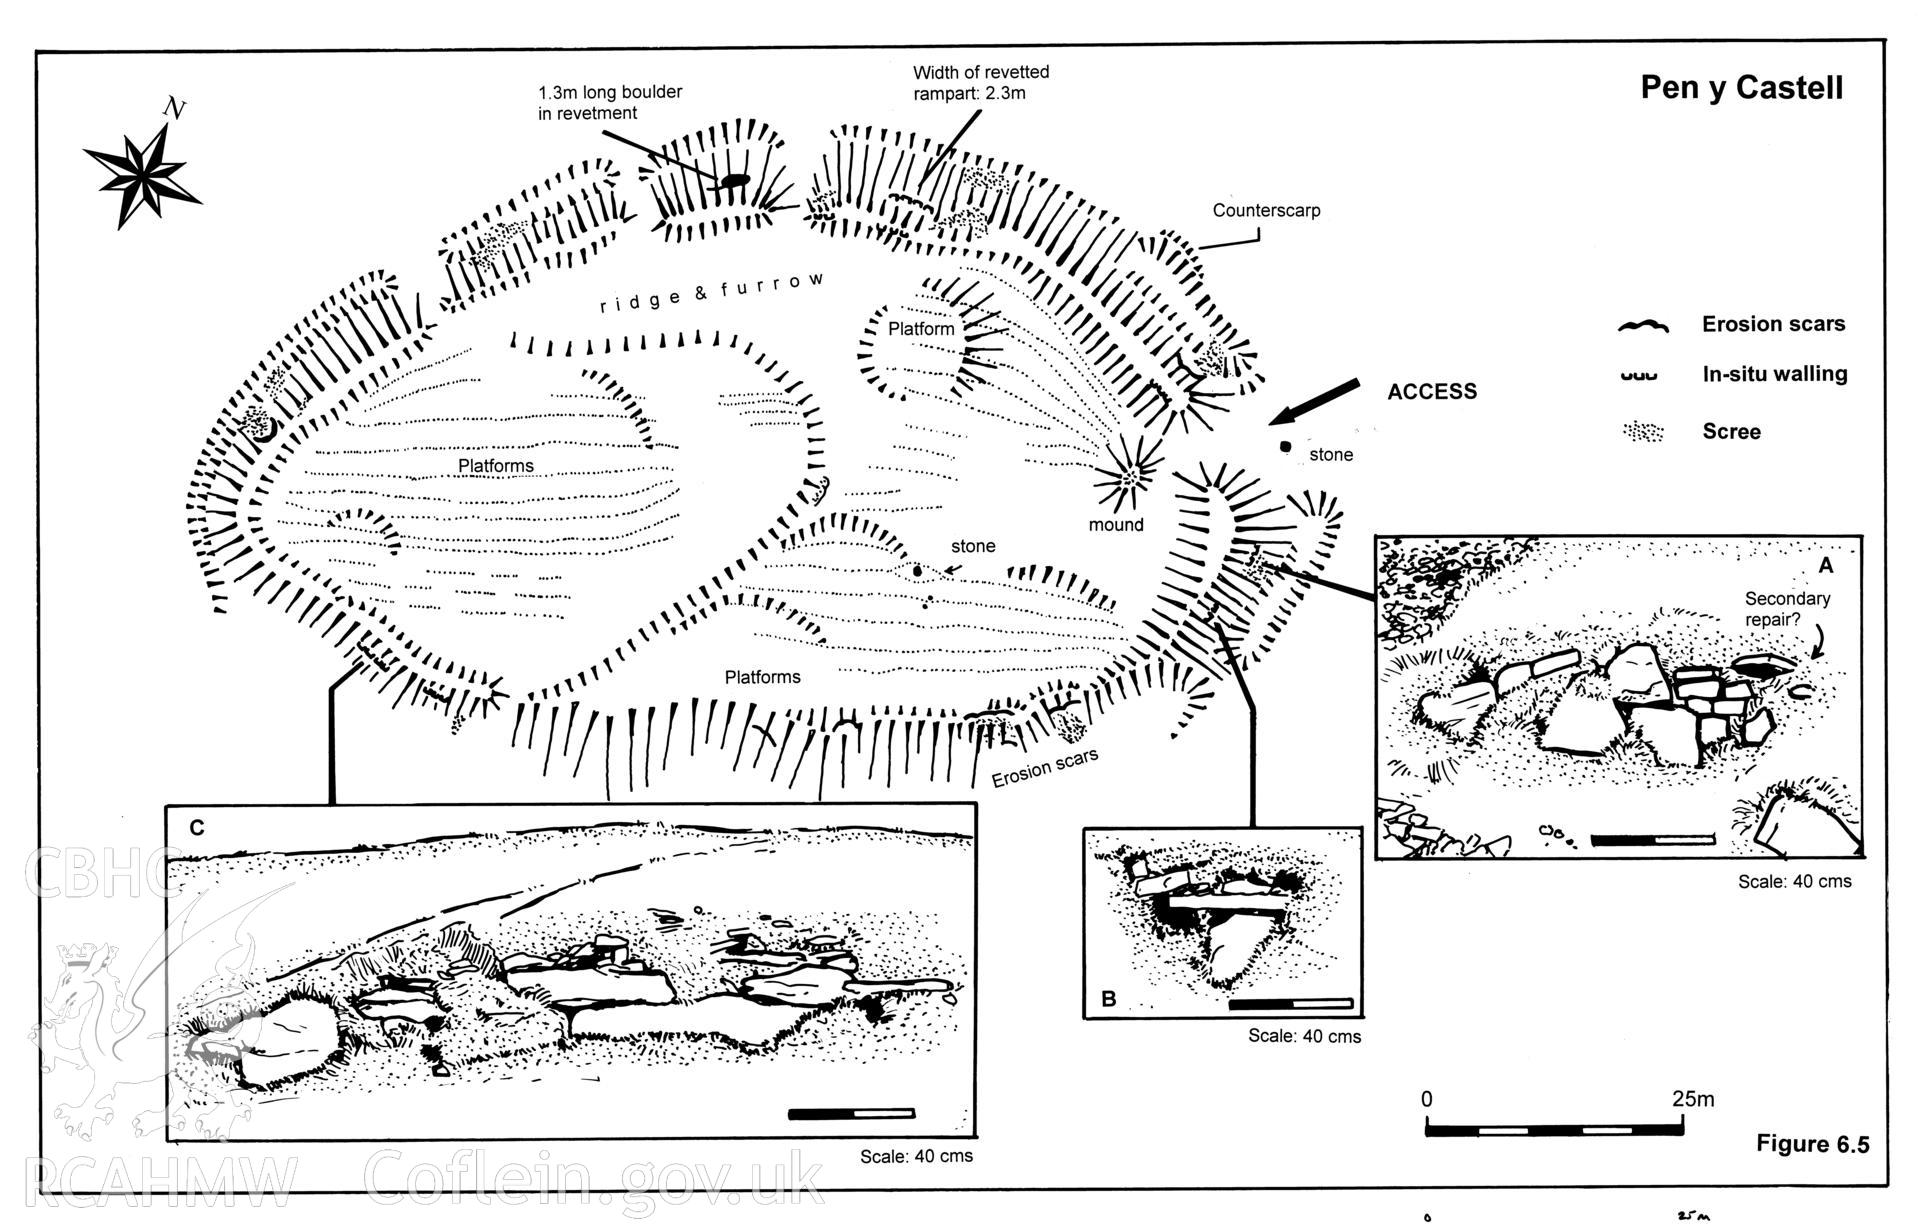 Digital copy of plan and detail drawings of Pen y Castell Hillfort, produced as part of a PHD thesis entitled "The Hillforts of North Ceredigion: Architecture, Landscape Approaches and Cultural Contexts", by Toby Driver, 2005. Originals not yet deposited in NMR Archive.